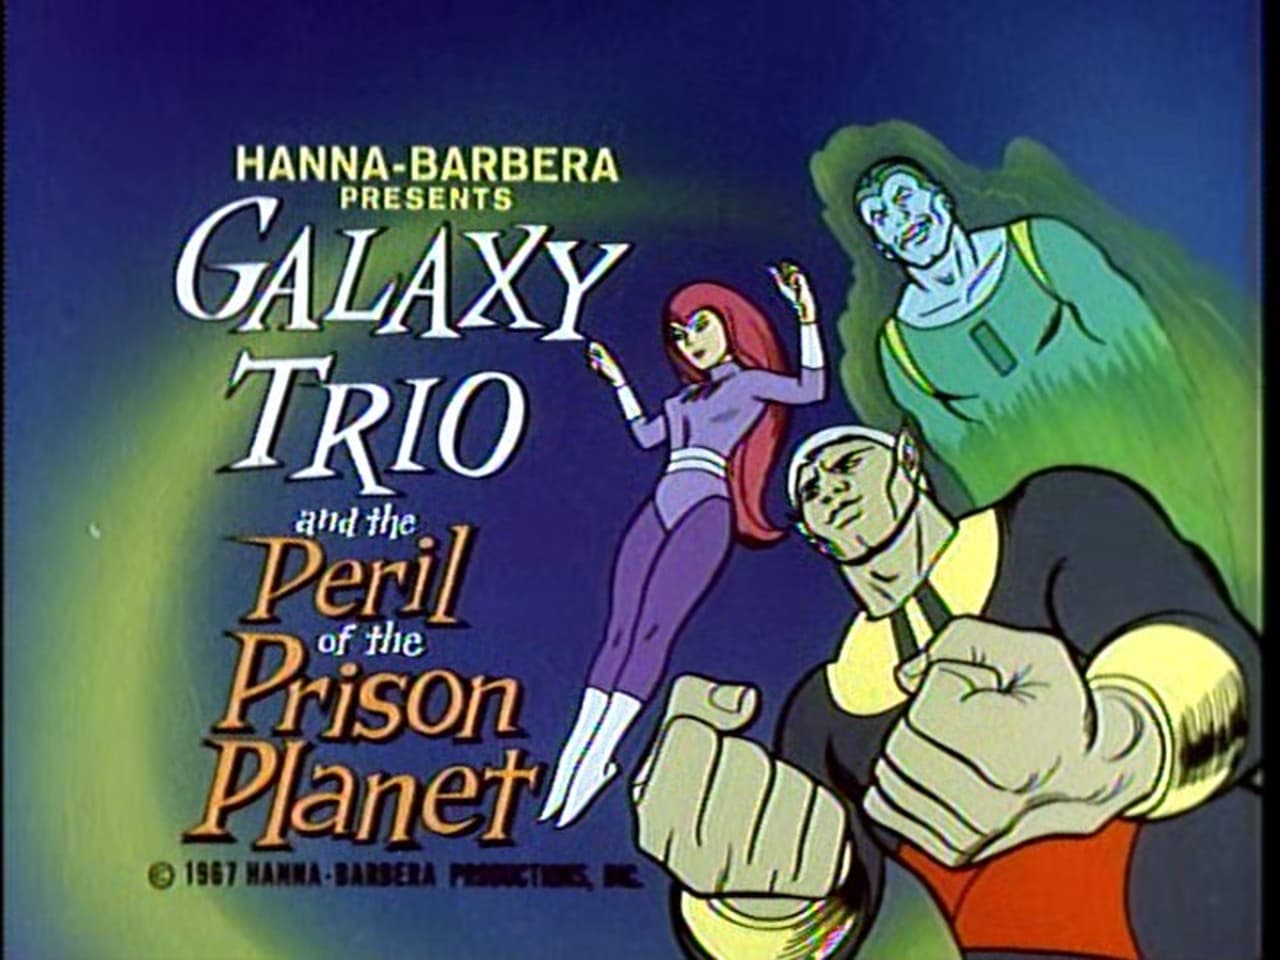 The Galaxy Trio and the Peril of the Prison Planet